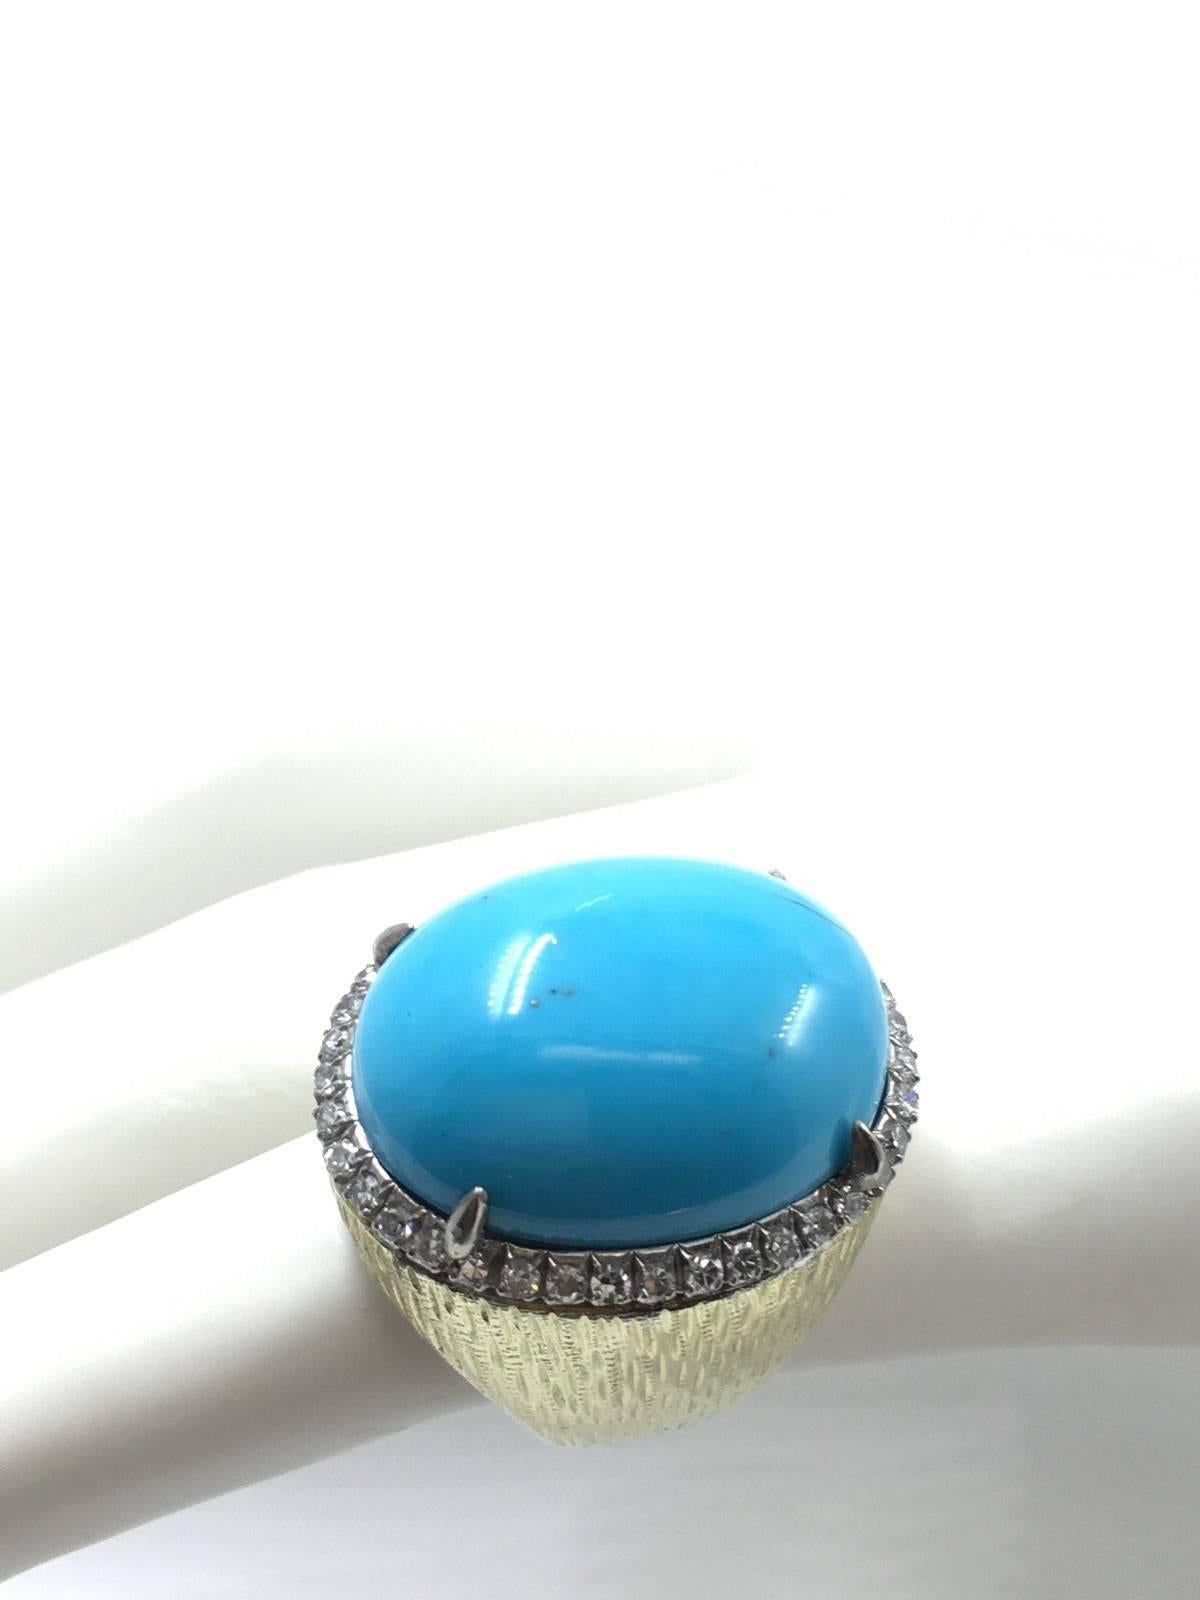 A Magnificent Persian Turquoise
Fine gold mount and a stunning large stone. Sure to become your favorite cocktail ring! 
Very RARE find
The turquoise has an intense, yet very pleasant colour and a sporty curveous shape, which makes the ring very